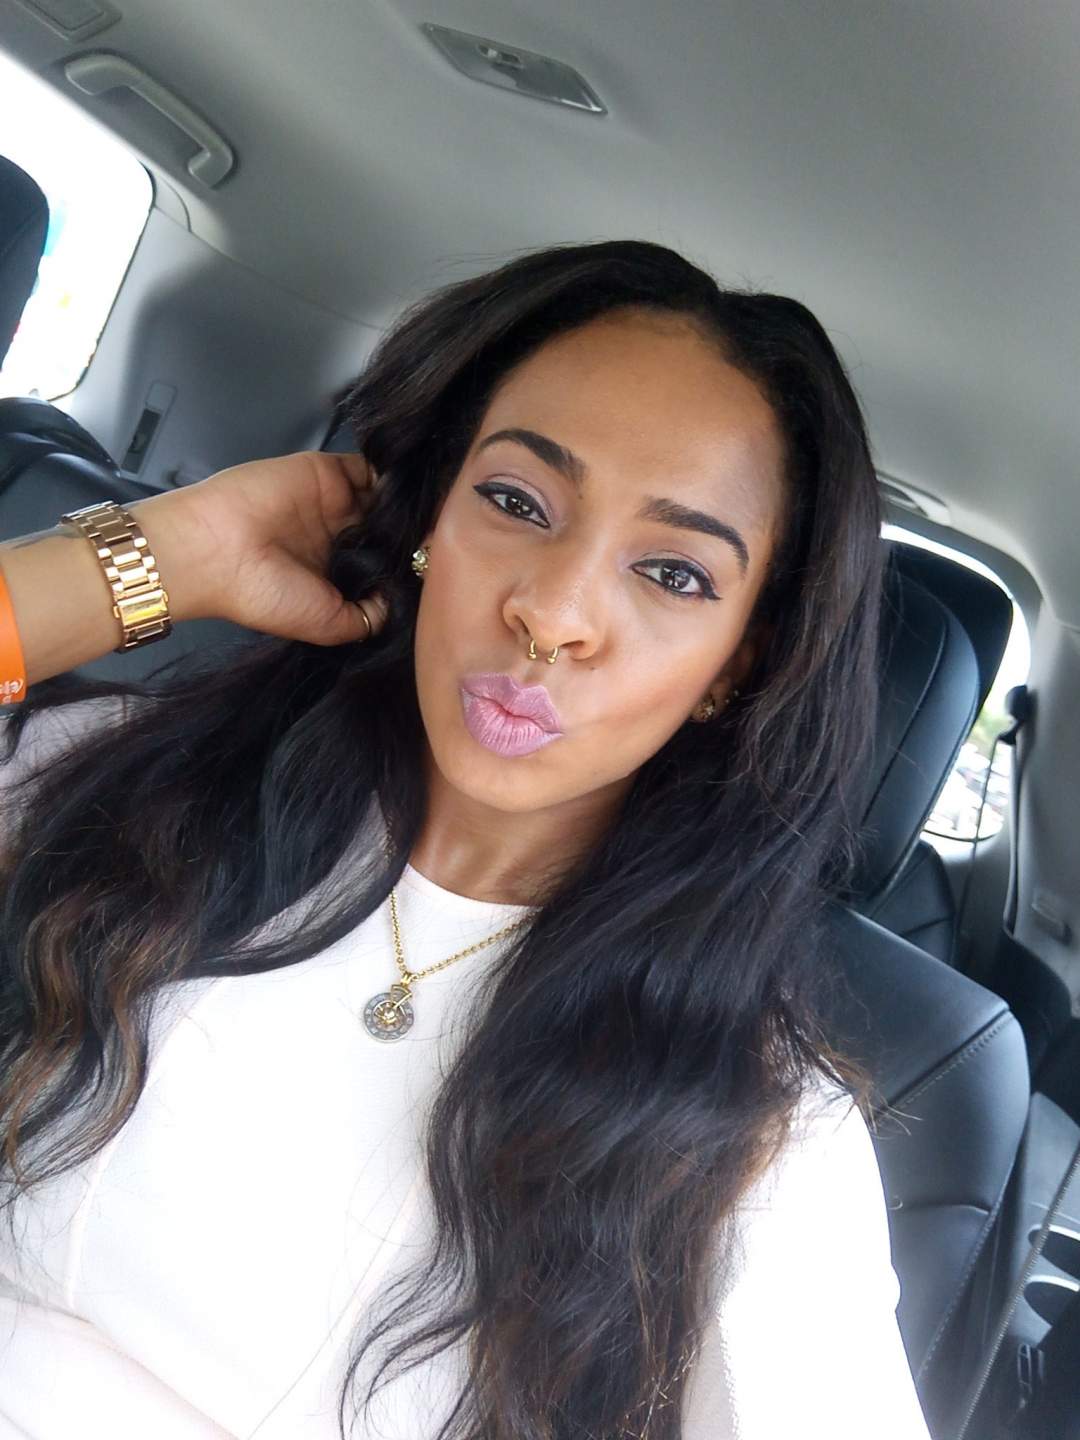 Nigerians react as Tboss claims she spoke her daughter into existence